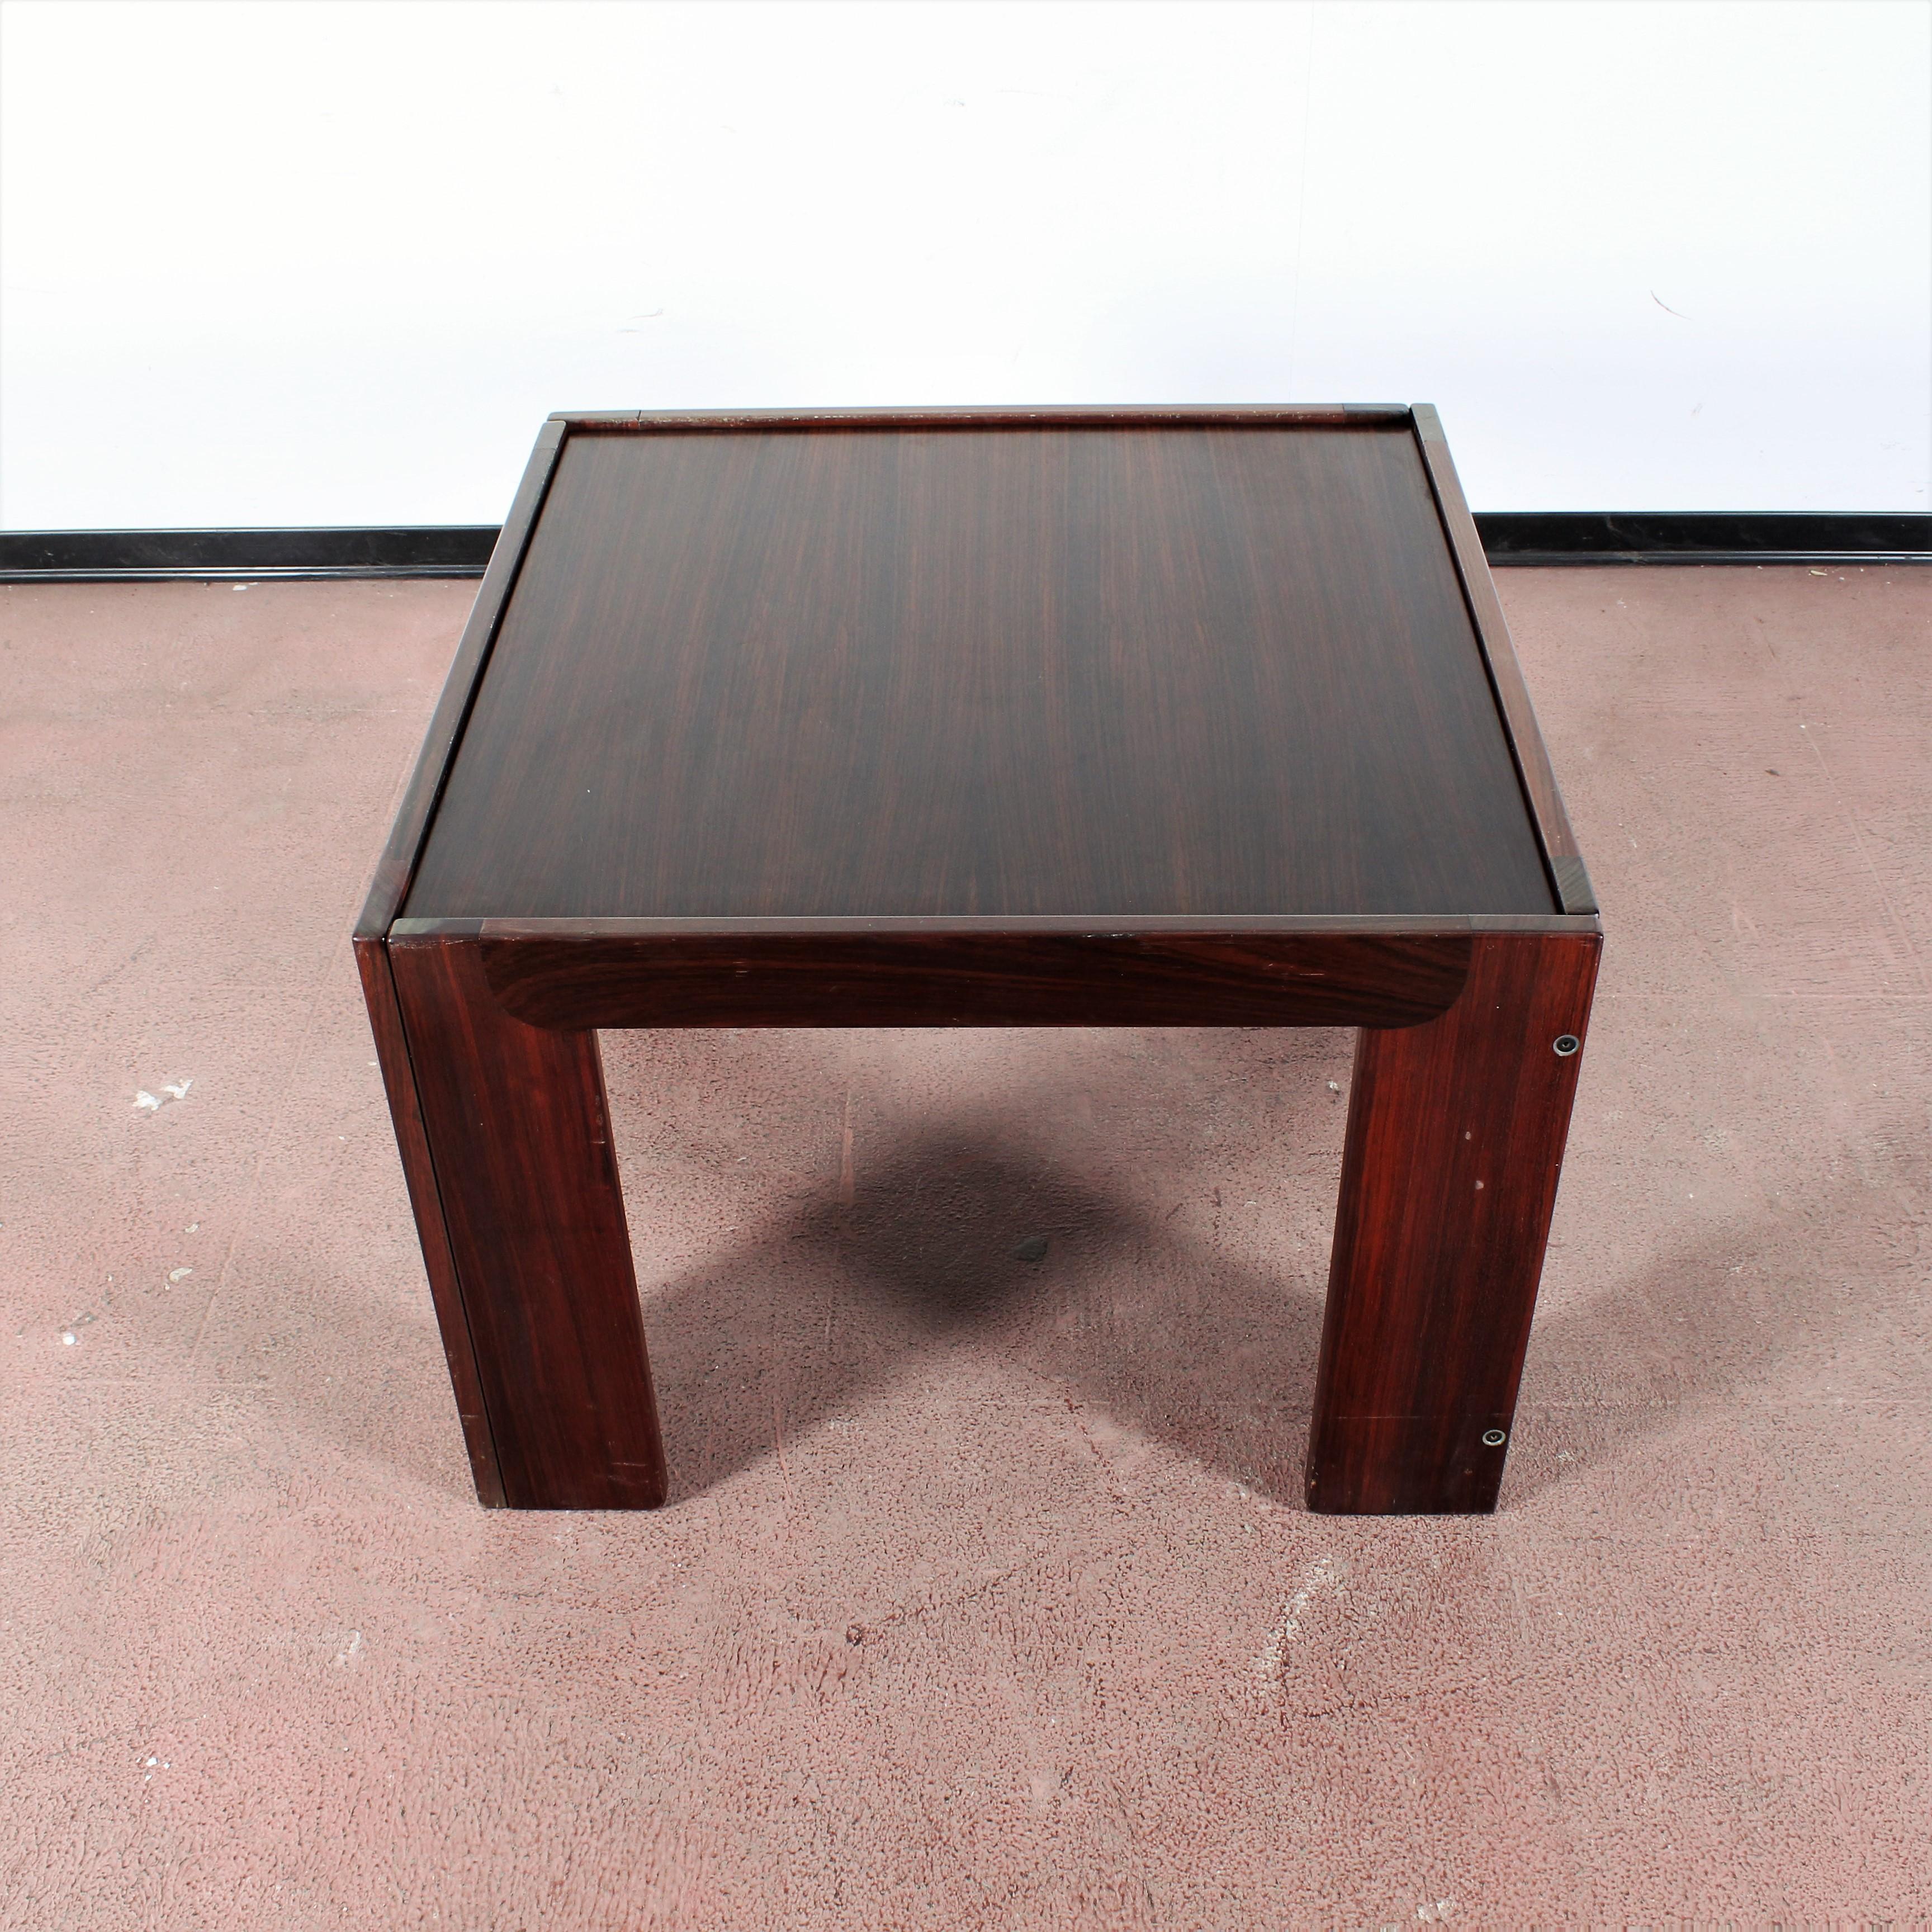 Mid-Century A. & T. Scarpa for Cassina, Meda Wood Coffee Table mod 771 '65 Italy 8